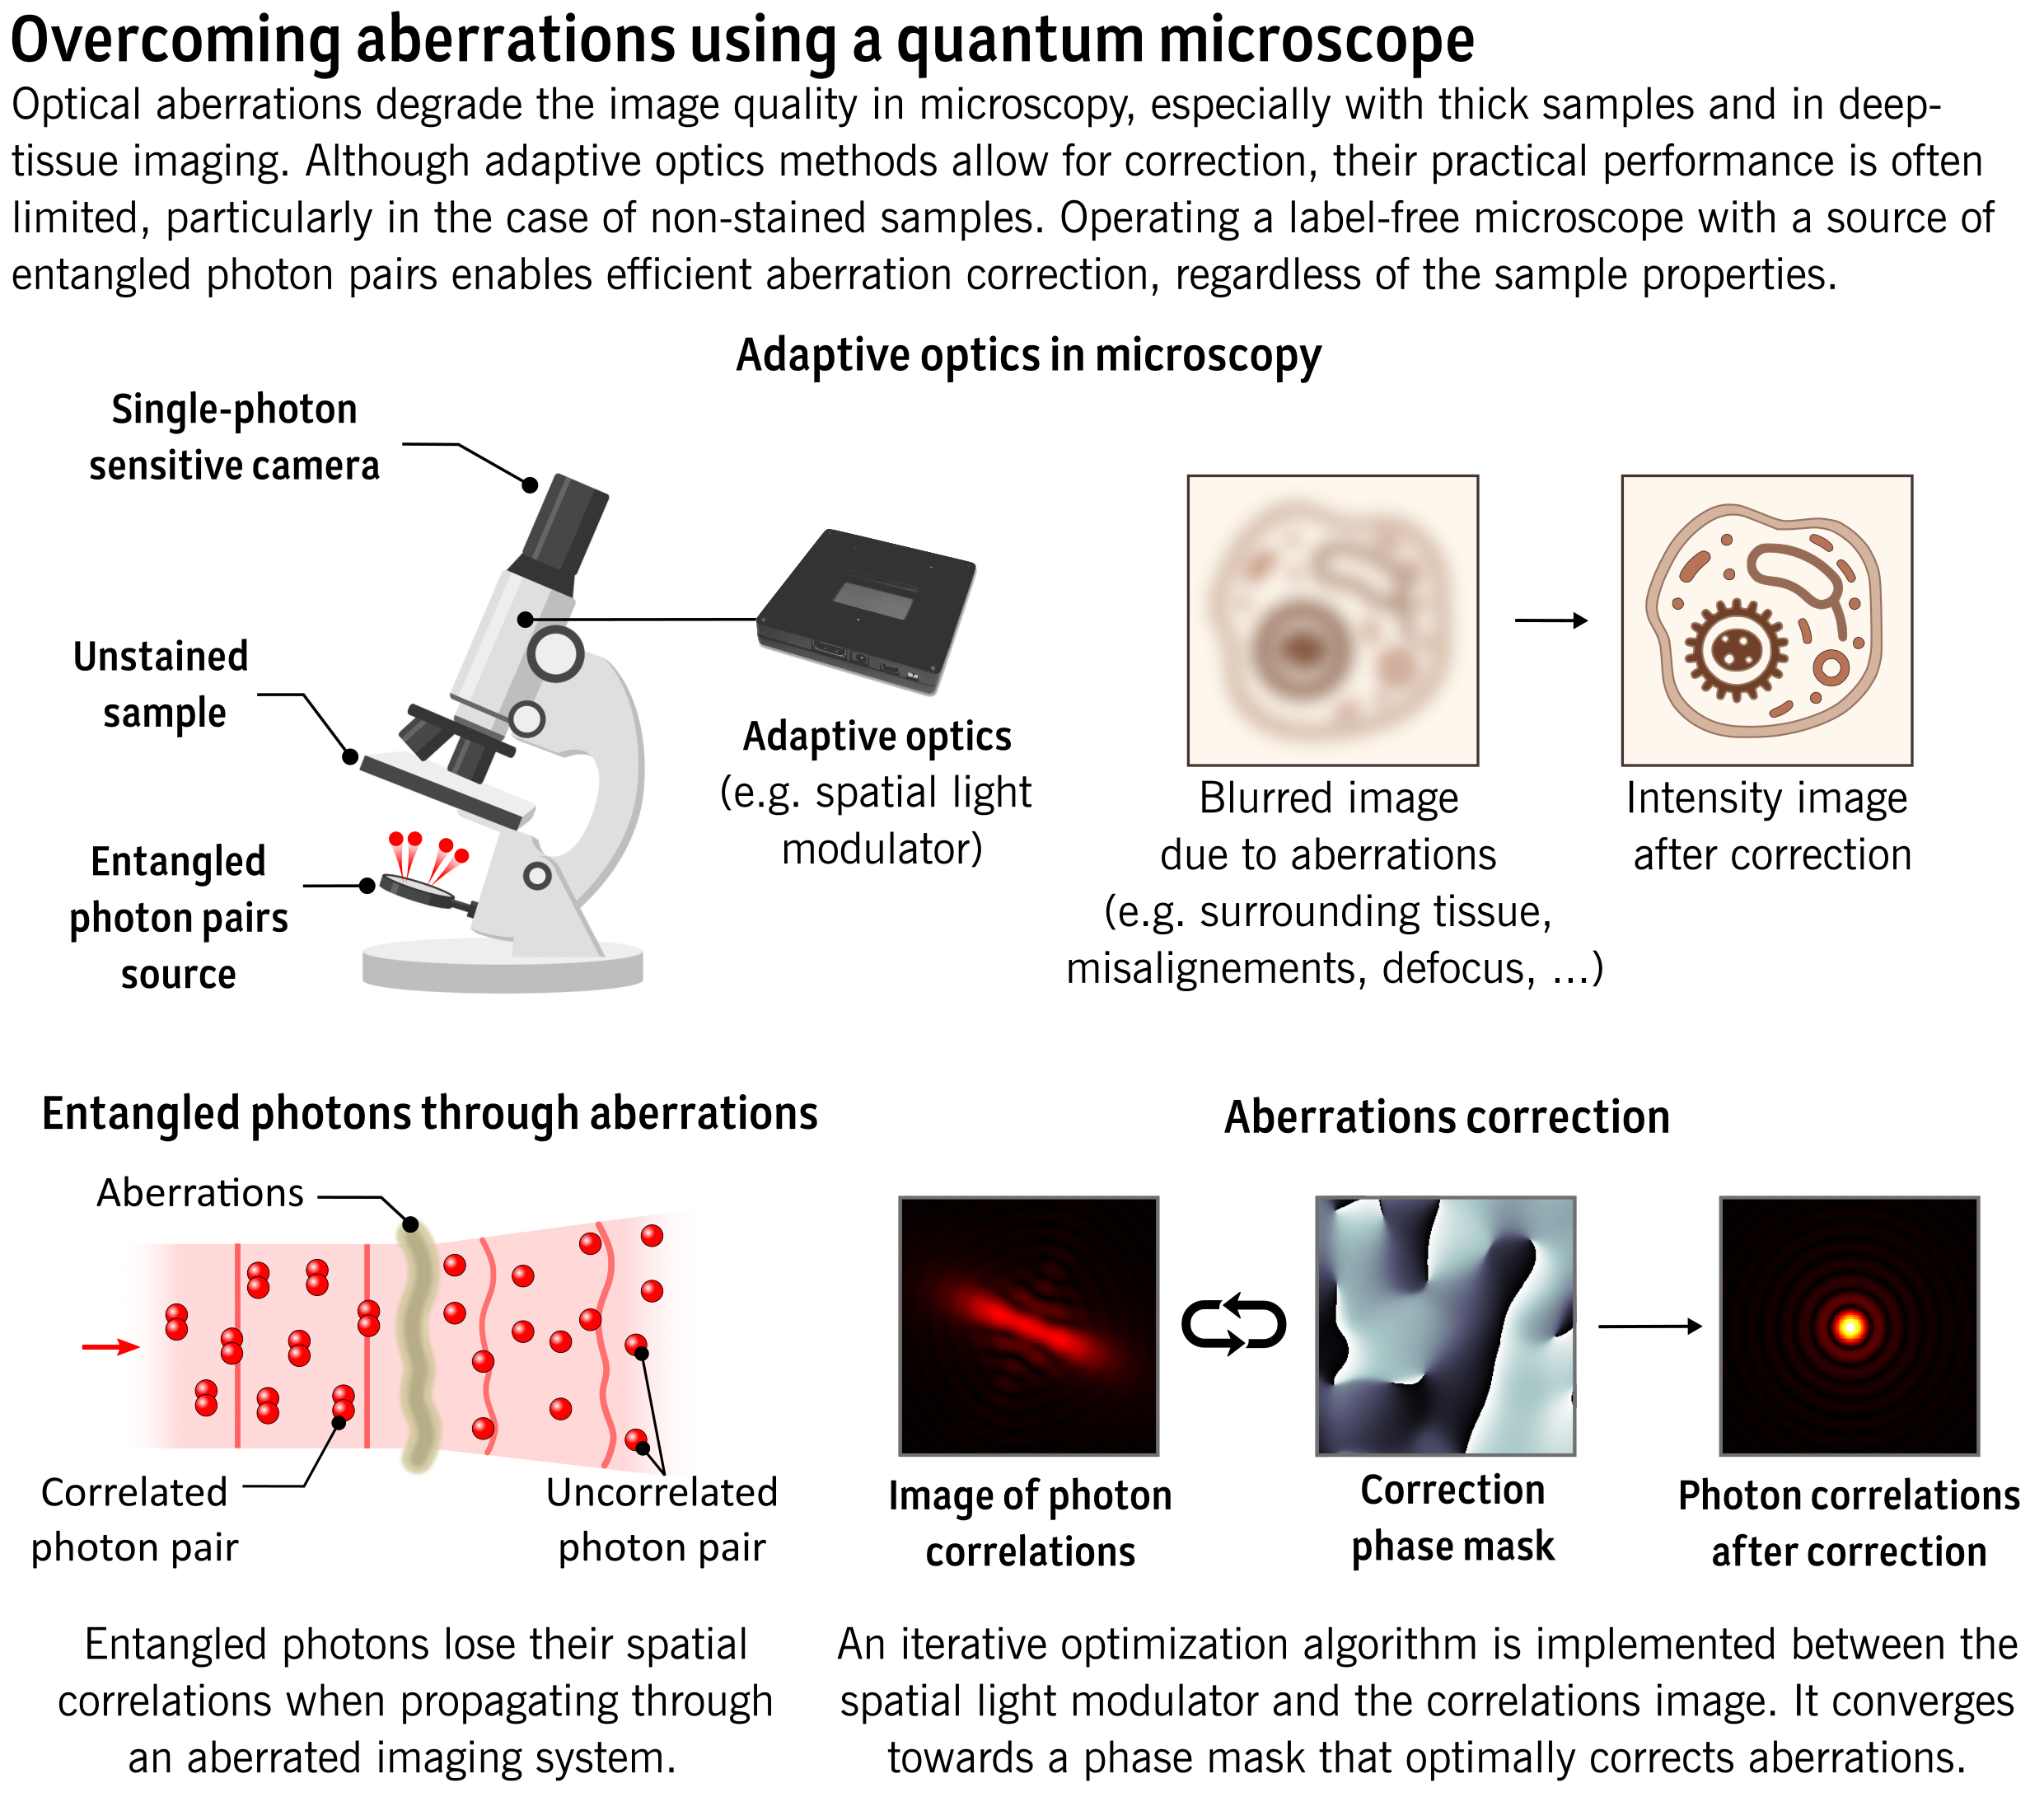 Optical aberrations degrade the image quality in microscopy, especially with thick samples and in deep-tissue imaging. Although adaptive optics methods allow for correction, their practical performance is often limited, particularly in the case of non-stained samples. Operating a label-free microscope with a source of entangled photon pairs enables efficient aberration correction, regardless of th